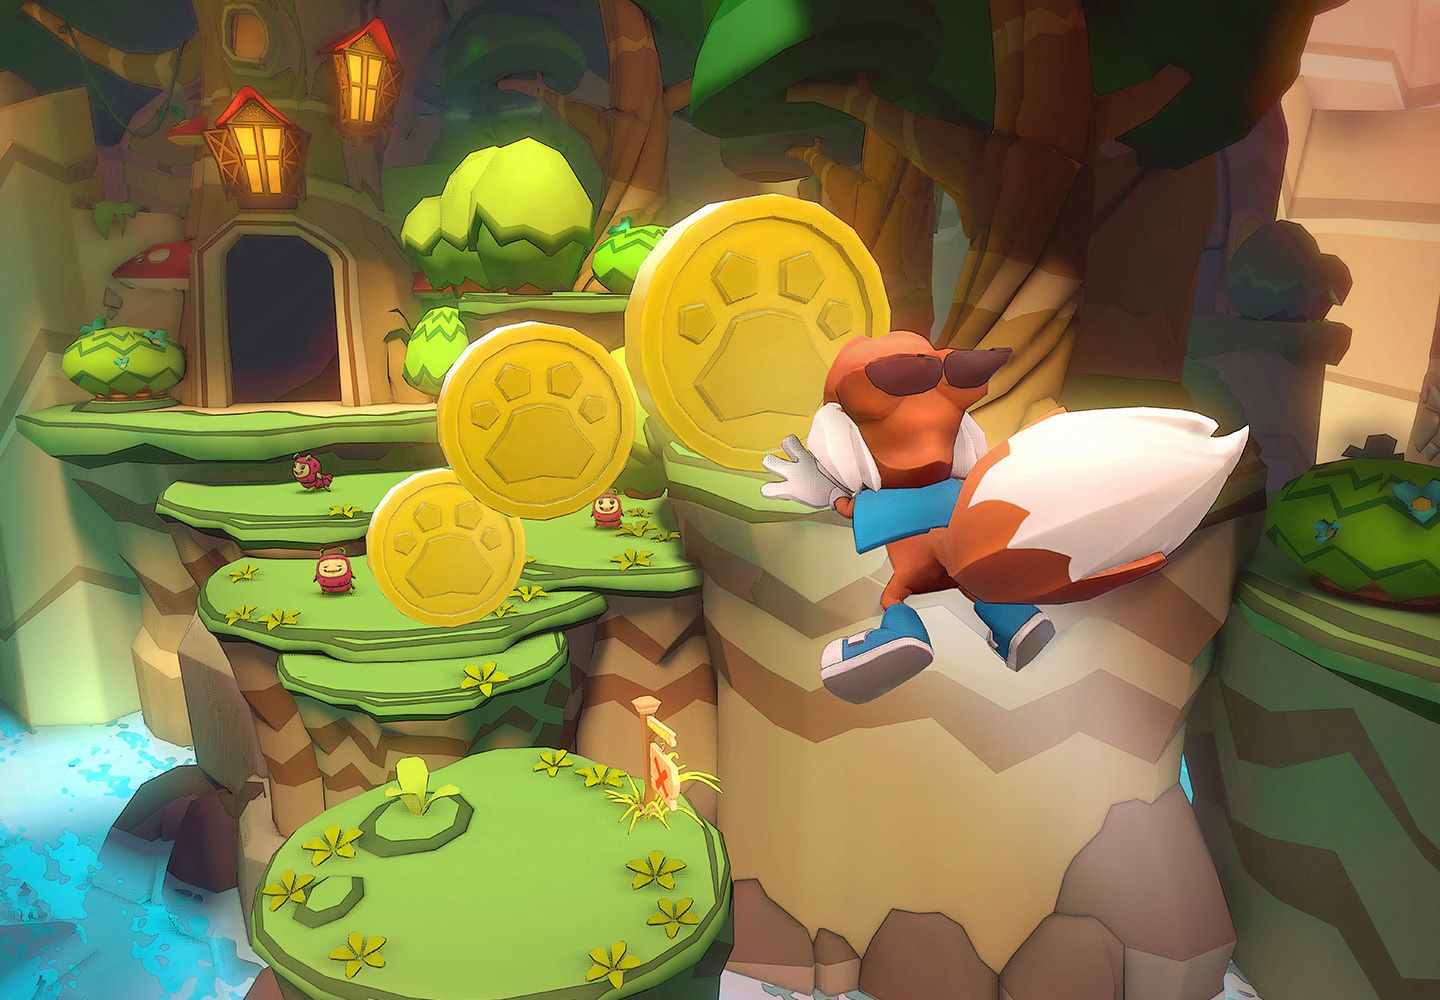 Lucky's Tale tries to take Mario well beyond 3-D